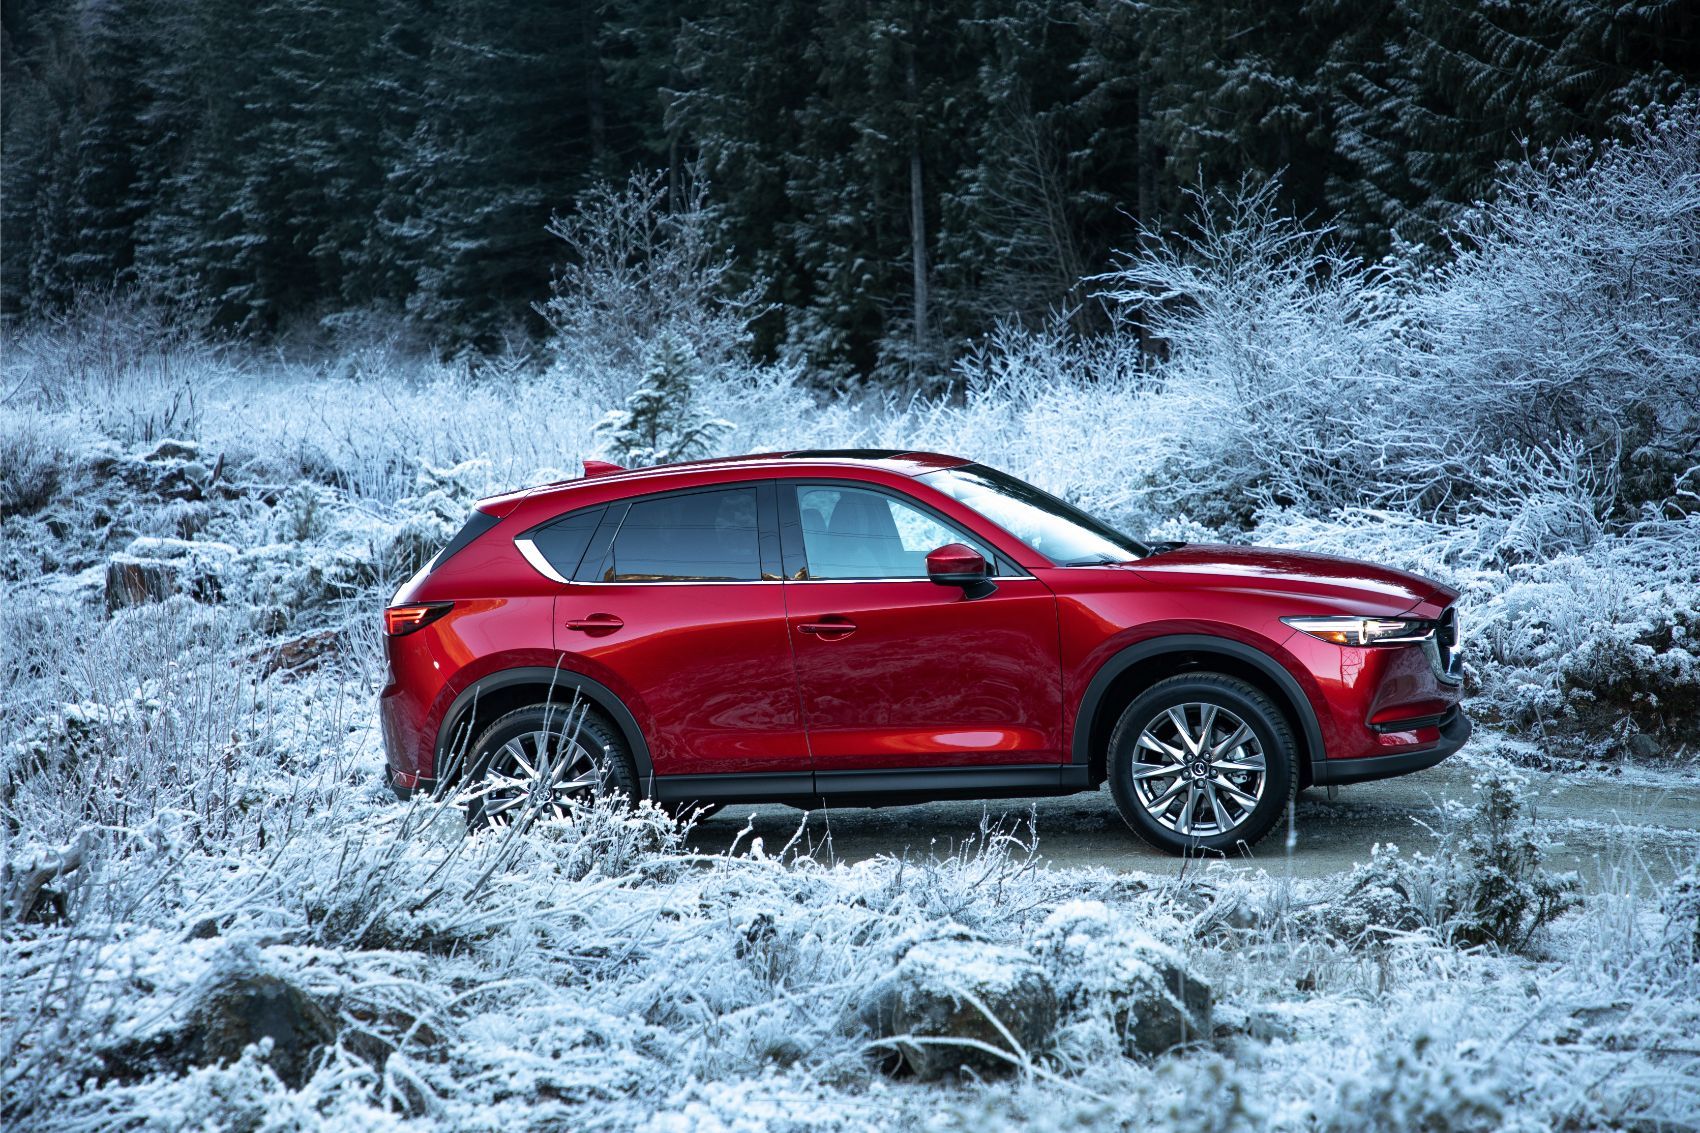 Extending your Mazda warranty can help protect your CX-5 or other Mazda vehicles. 